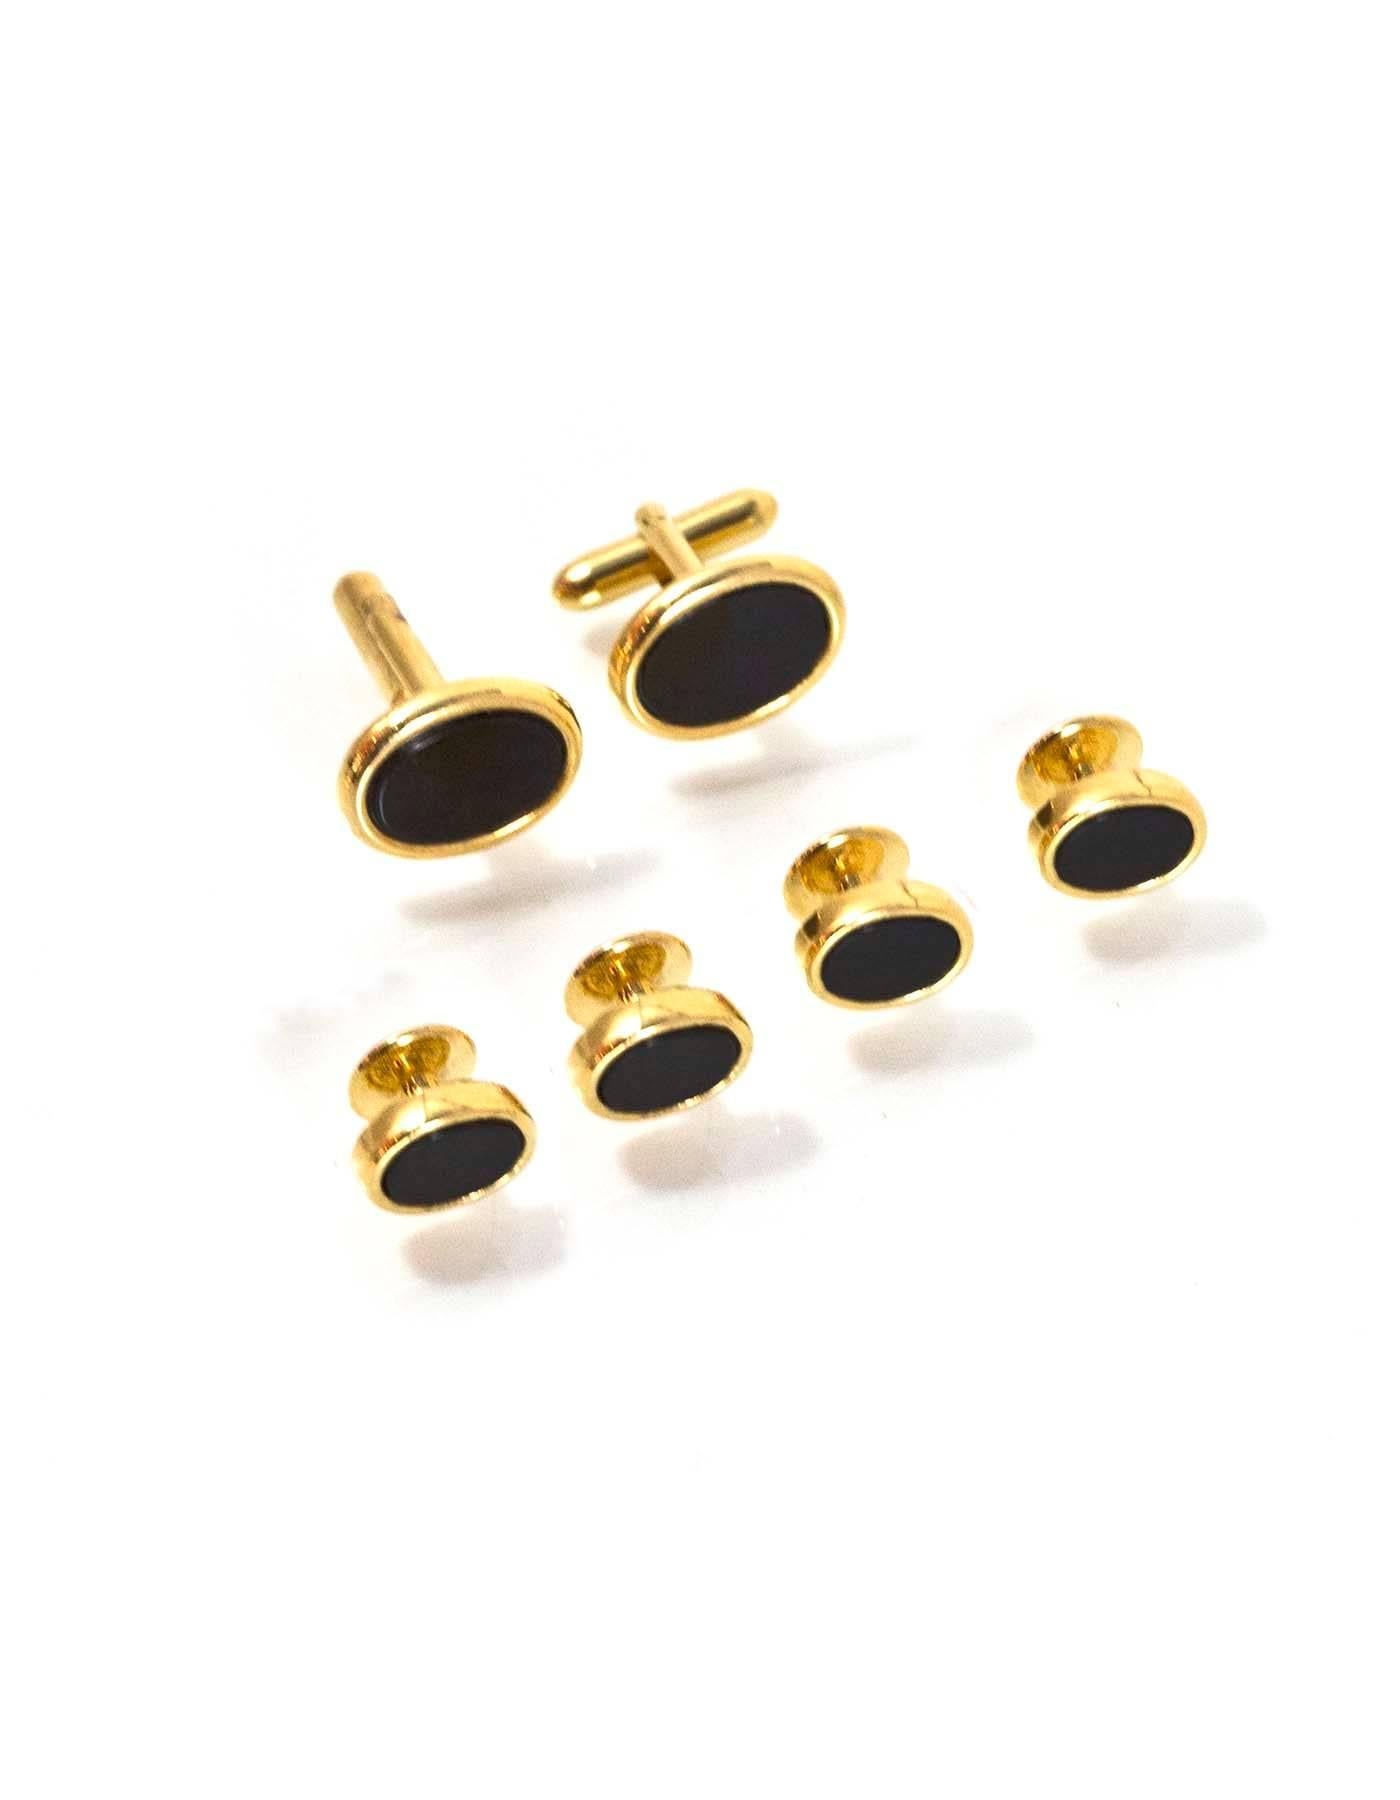 Pierre Cardin Black Onyx & Goldtone Tuxedo Set
Features two cufflinks and four buttons

Color: Black, gold
Hardware: Goldtone
Materials: Onyx, metal
Overall Condition: Excellent good pre-owned condition, light surface marks and tarnish
Inlcuded: